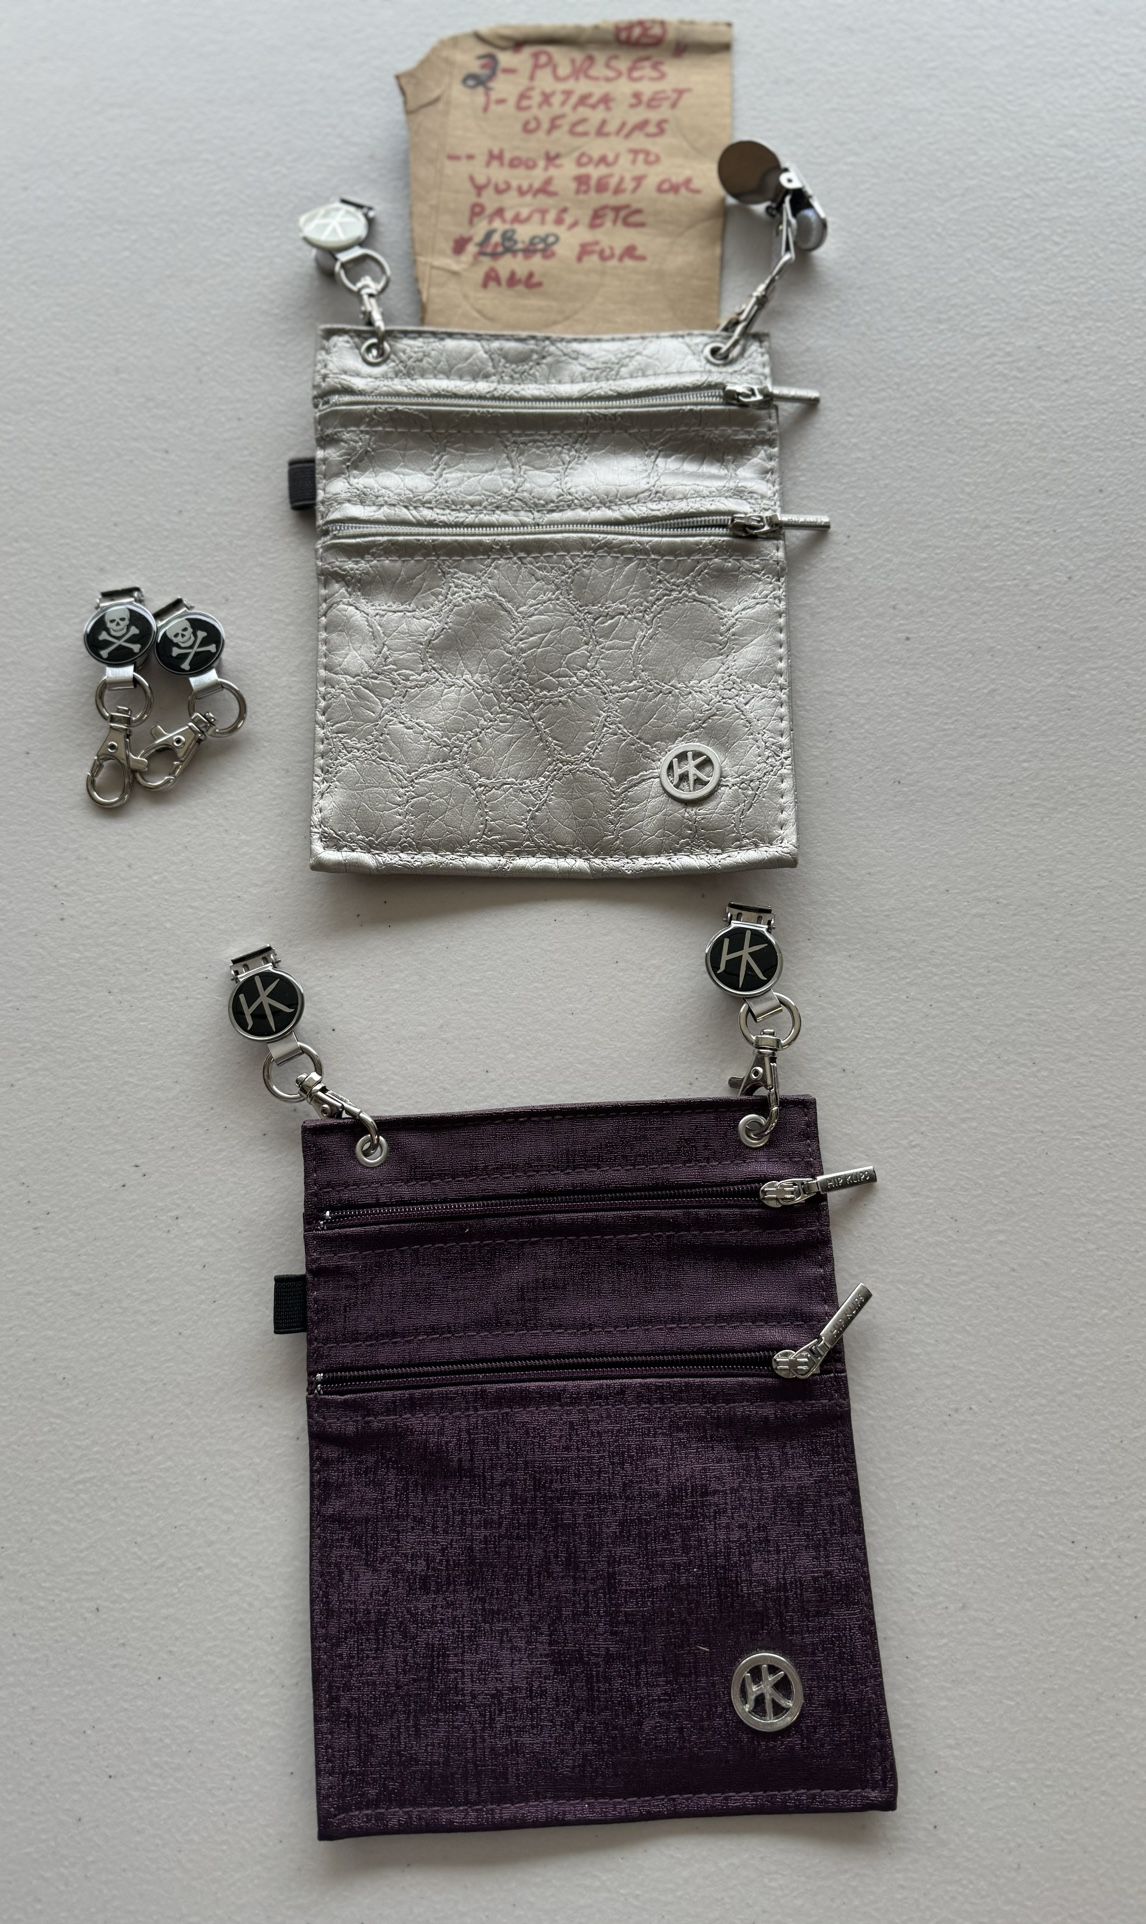 Hook on Belt, pants, etc Purple and Silver Purses (2) w/extra set of clips-$8 for all 